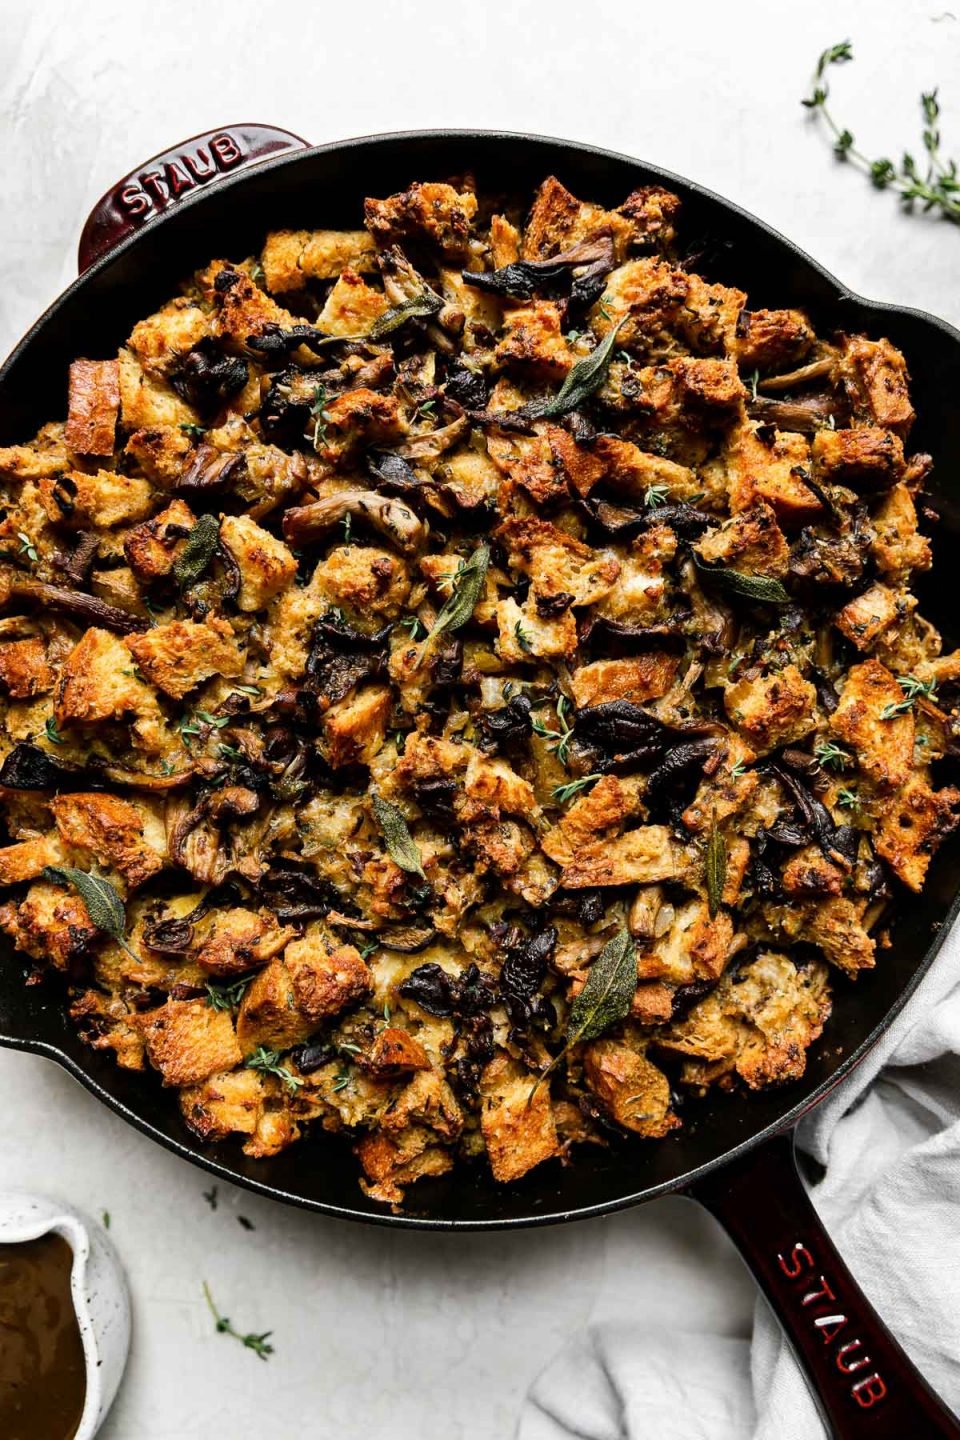 Baked wild mushroom stuffing fills a Grenadine colored Staub Cast Iron Skillet that sits atop a creamy white textured surface. A light gray linen napkin, loose sprigs of fresh herbs, and a small ceramic bowl filled with gravy sits alongside the skillet.